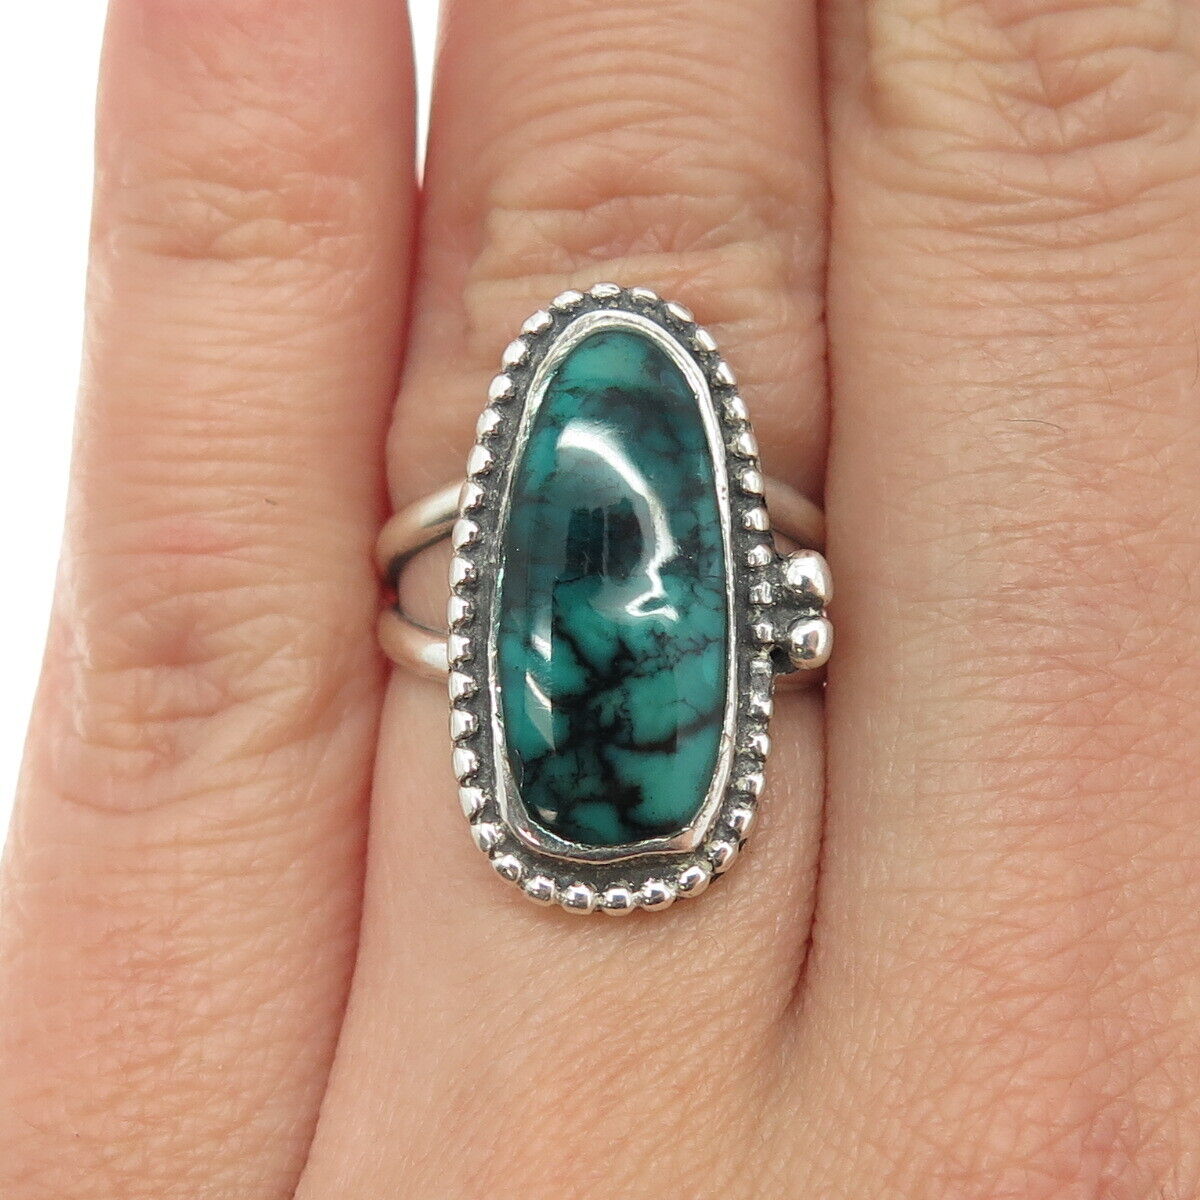 Old Pawn 925 Sterling Silver Southwestern Real Damale Turquoise Ring Size 5.5